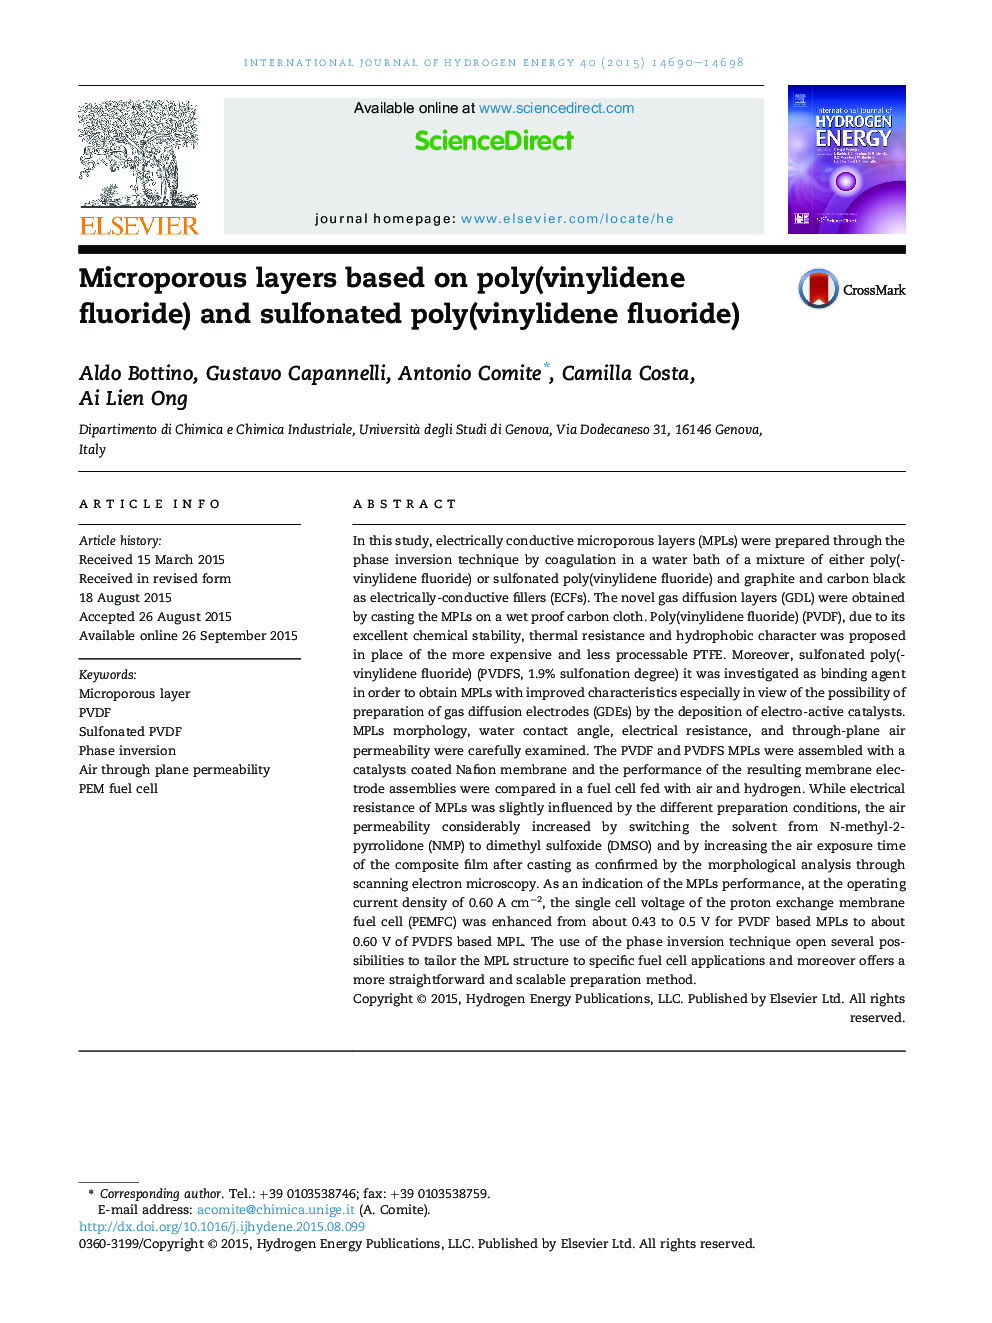 Microporous layers based on poly(vinylidene fluoride) and sulfonated poly(vinylidene fluoride)